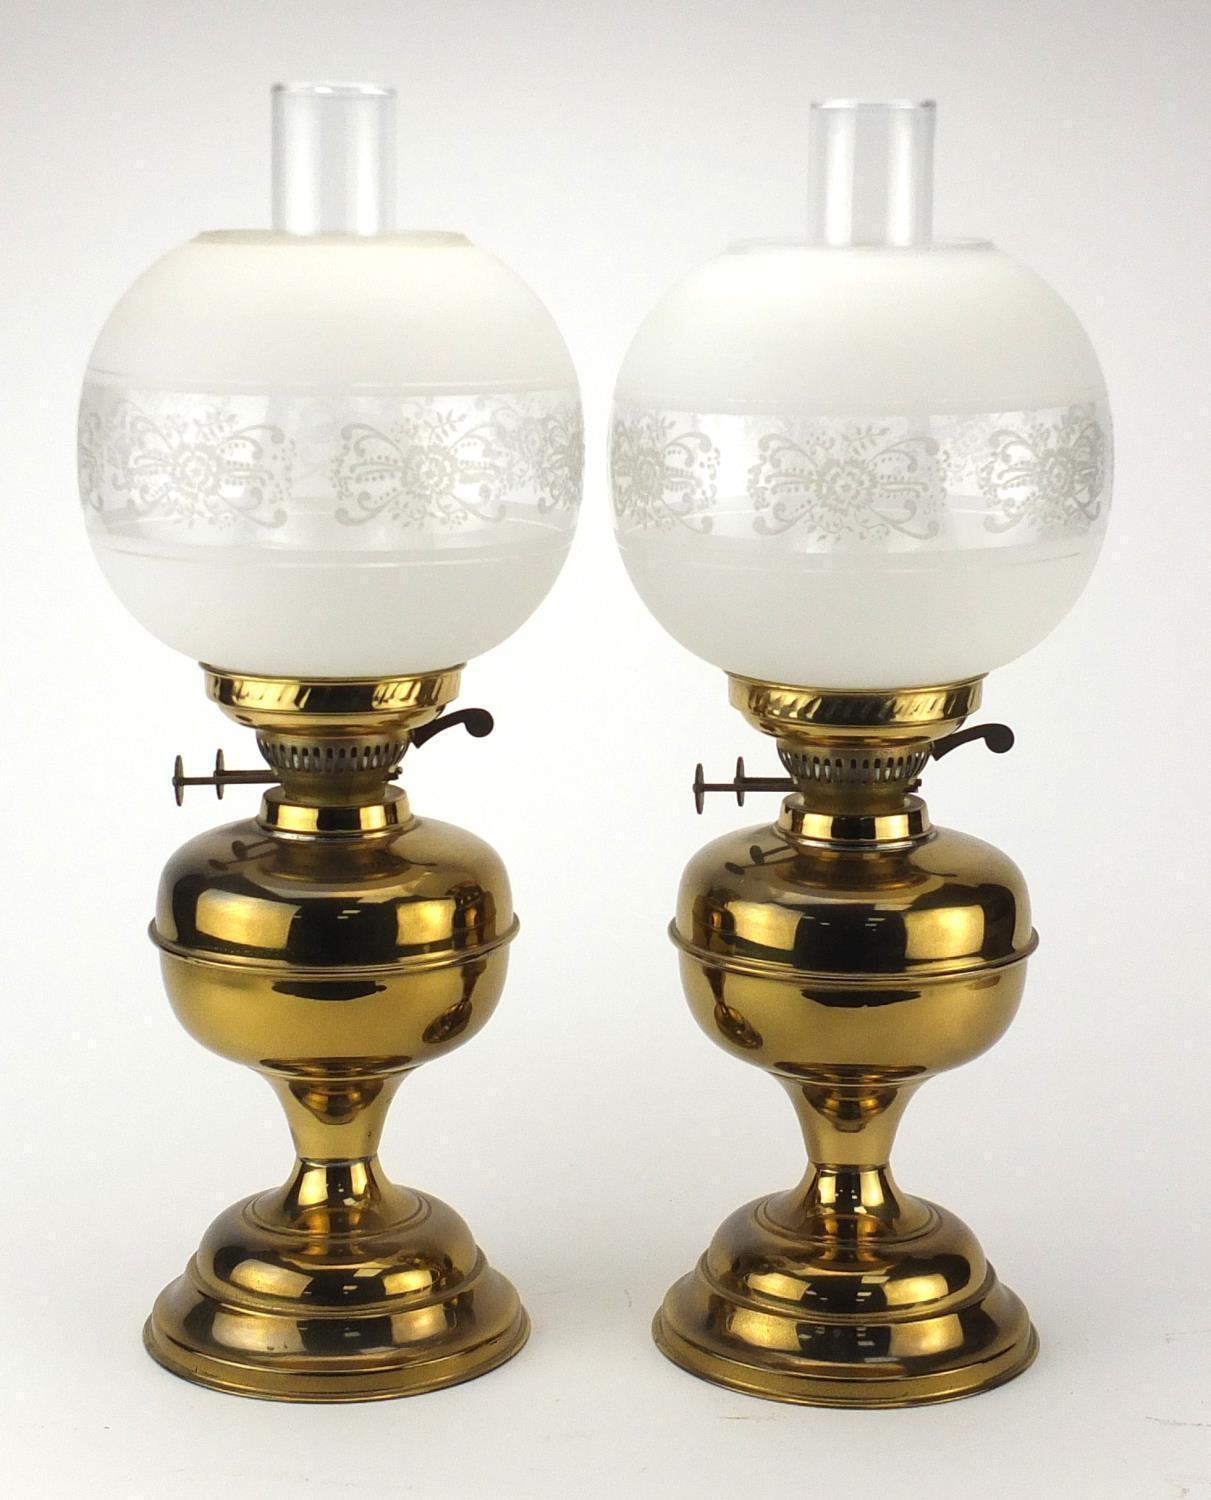 Pair of brass oil lamps with glass funnels and etched globular shades, each 51cm high : For